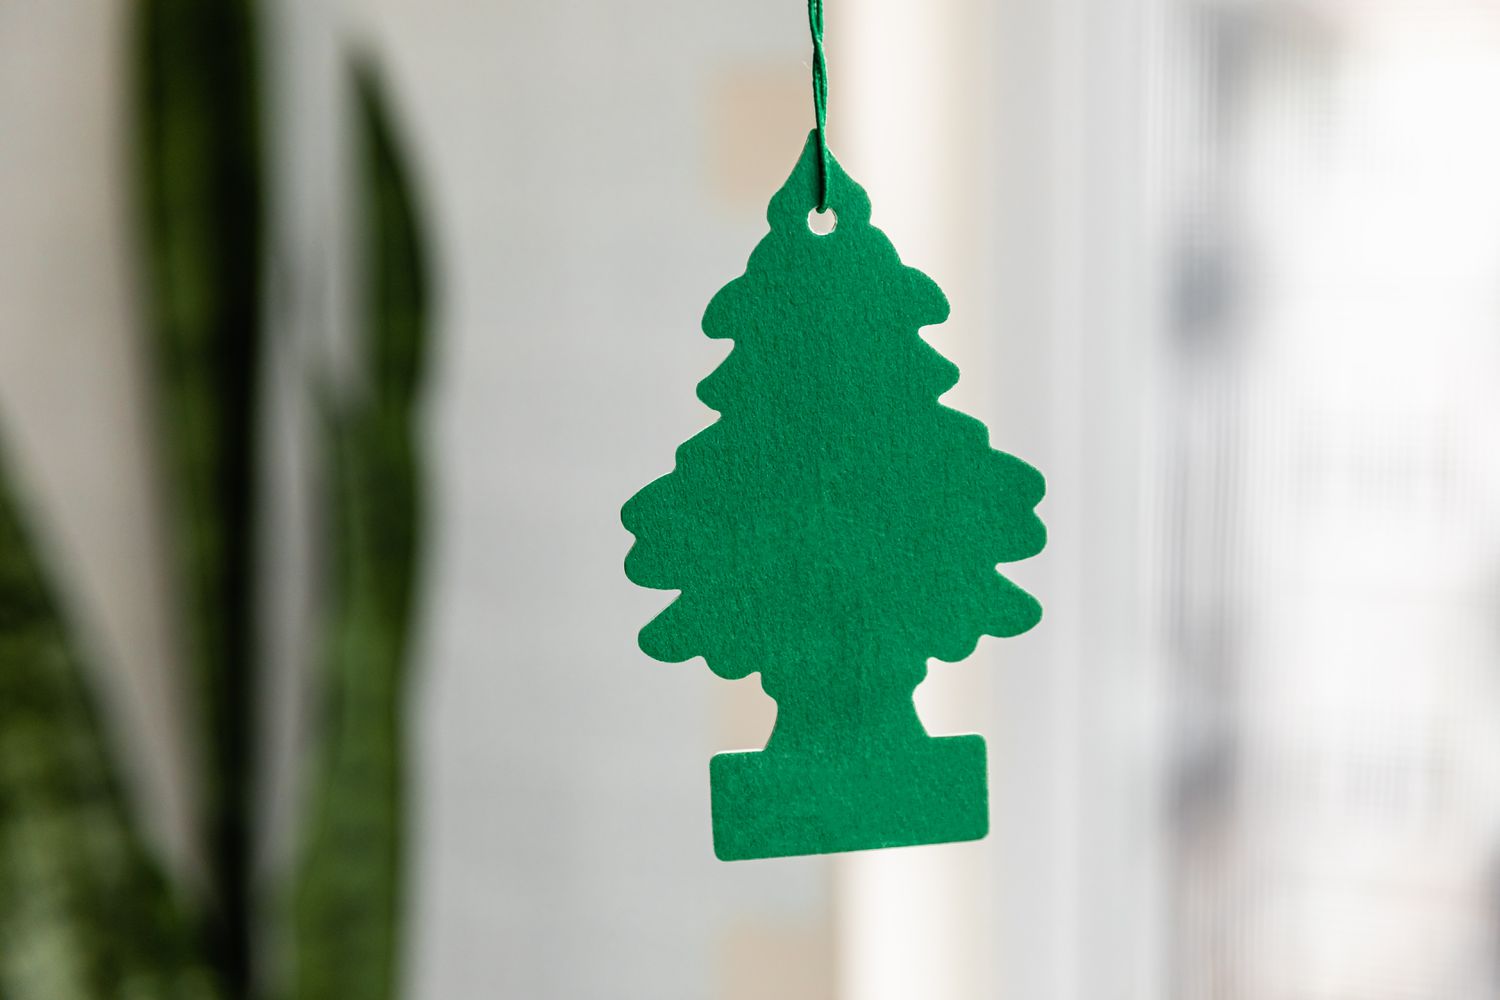 Pine-scented disinfectant tree hanging from string closeup